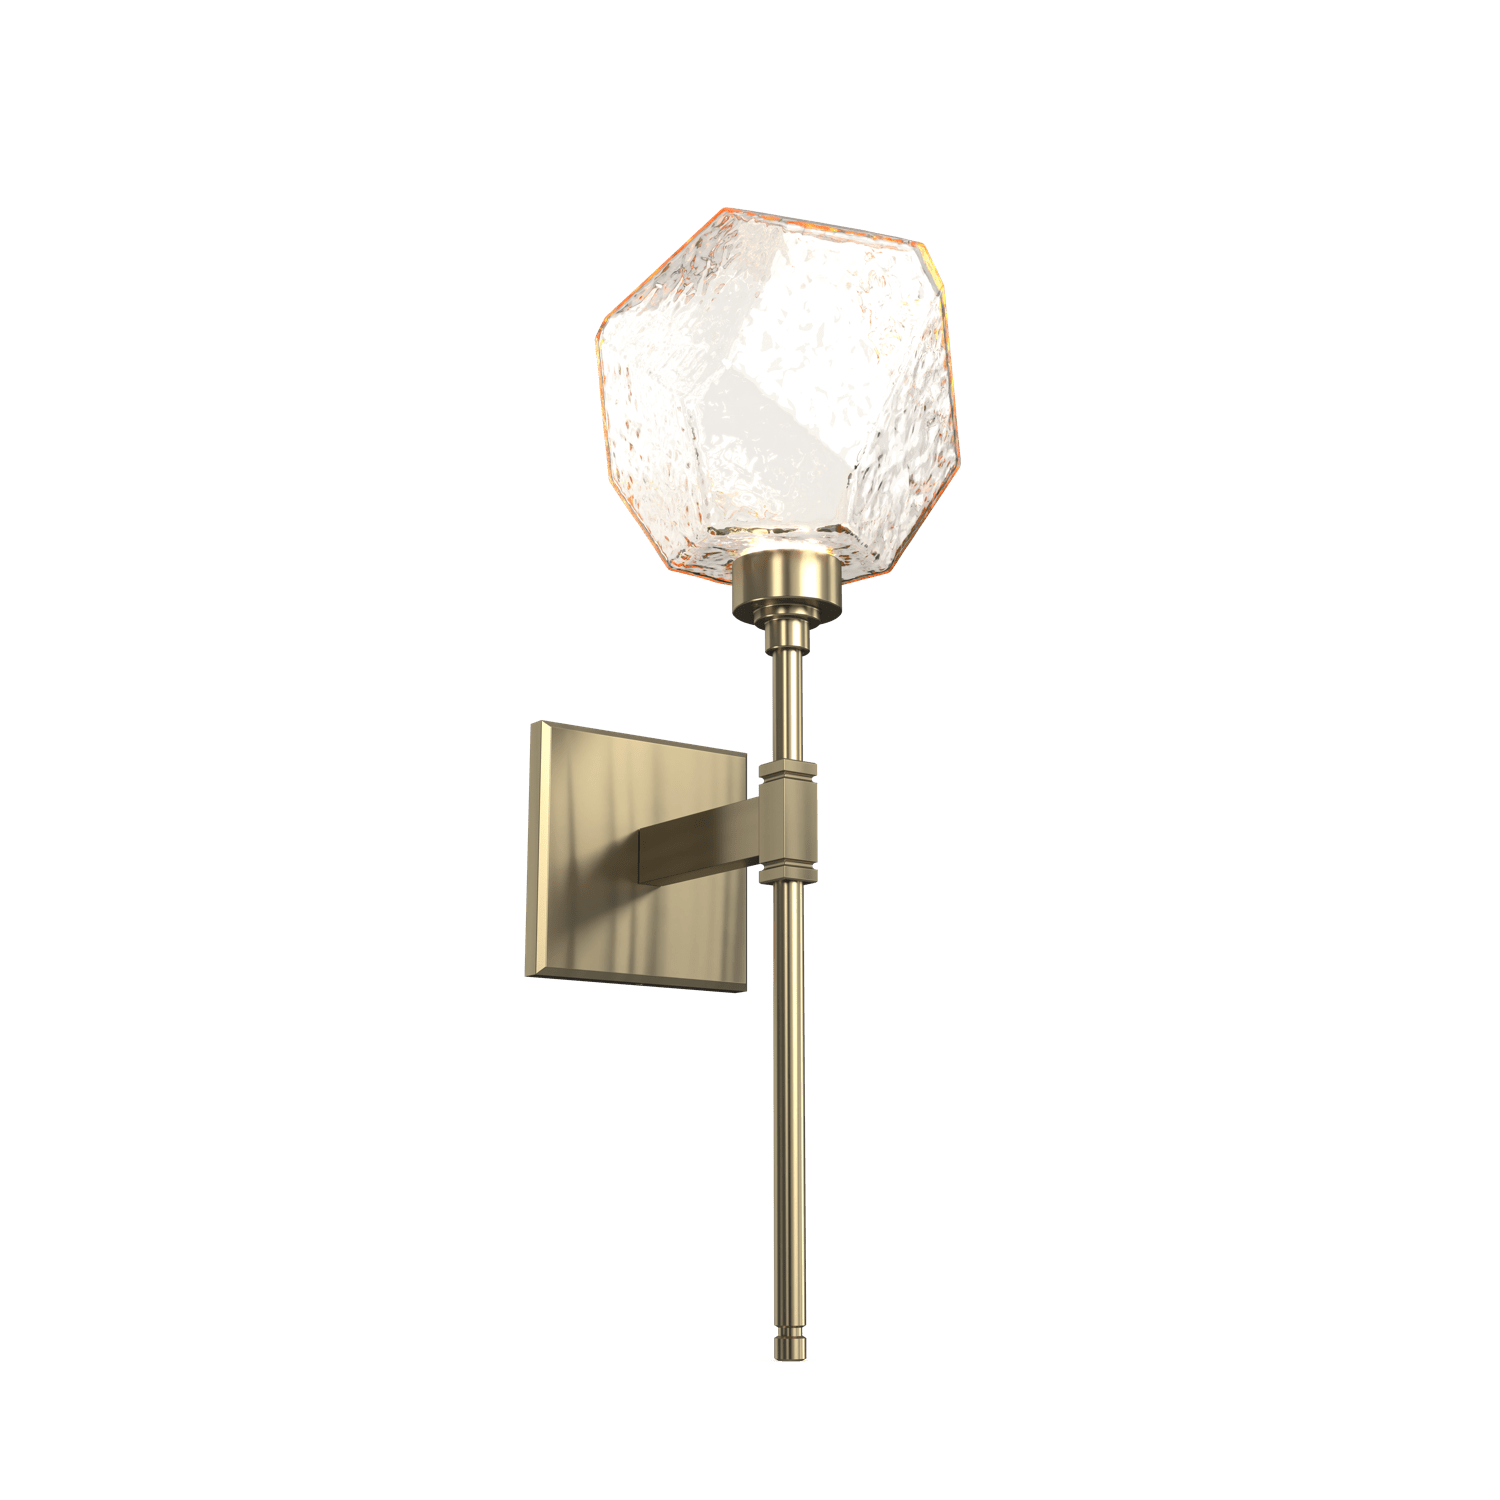 IDB0039-08-HB-A-Hammerton-Studio-Gem-belvedere-wall-sconce-with-heritage-brass-finish-and-amber-blown-glass-shades-and-LED-lamping